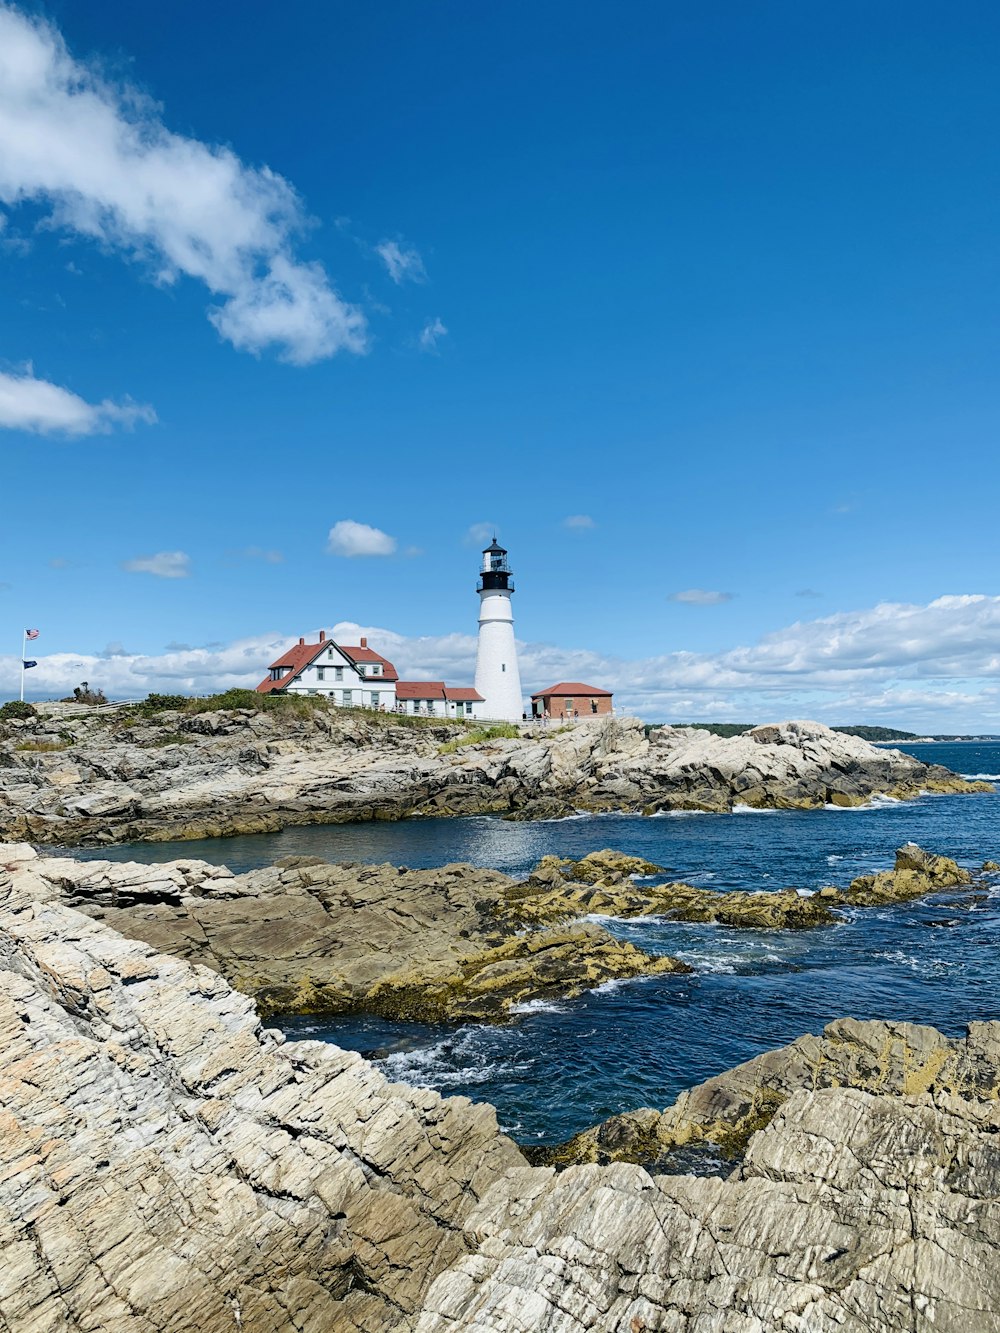 white and red lighthouse on rocky shore under blue sky during daytime